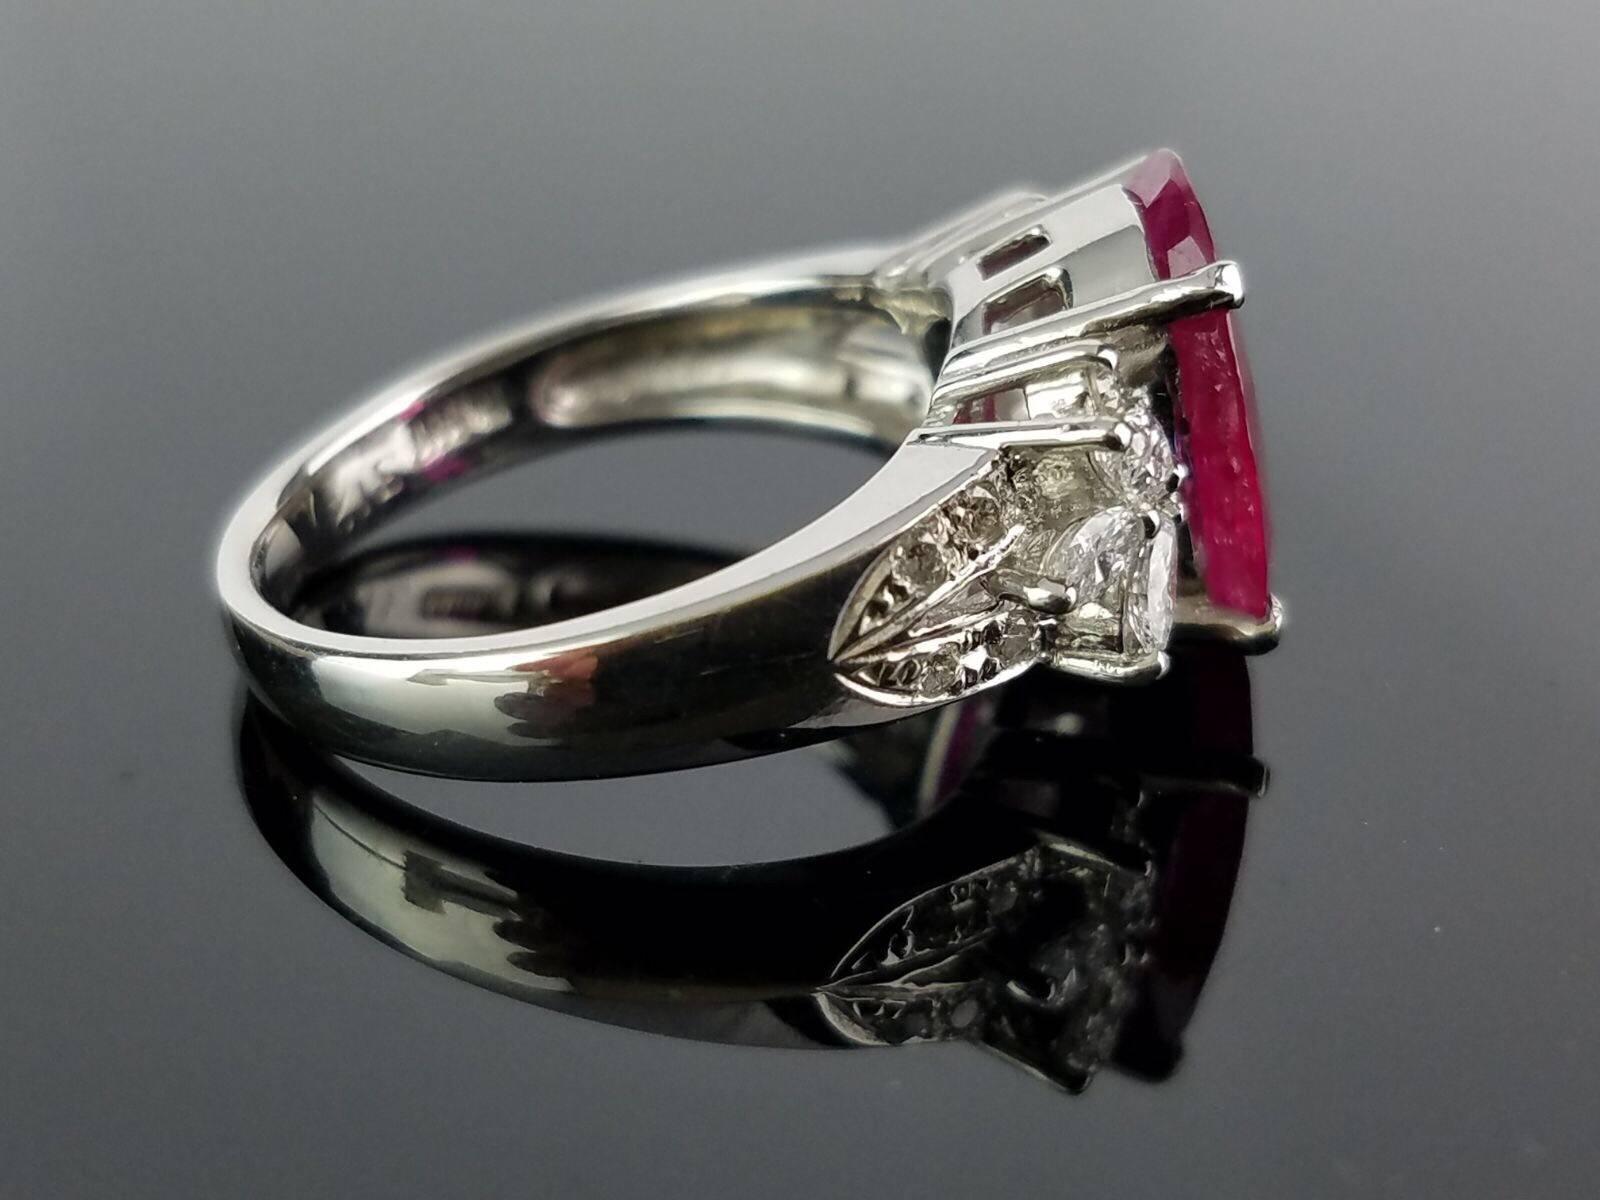 Oval Cut 3.12 Carat Burma Ruby and Diamond Cocktail Ring with a Platinum Band